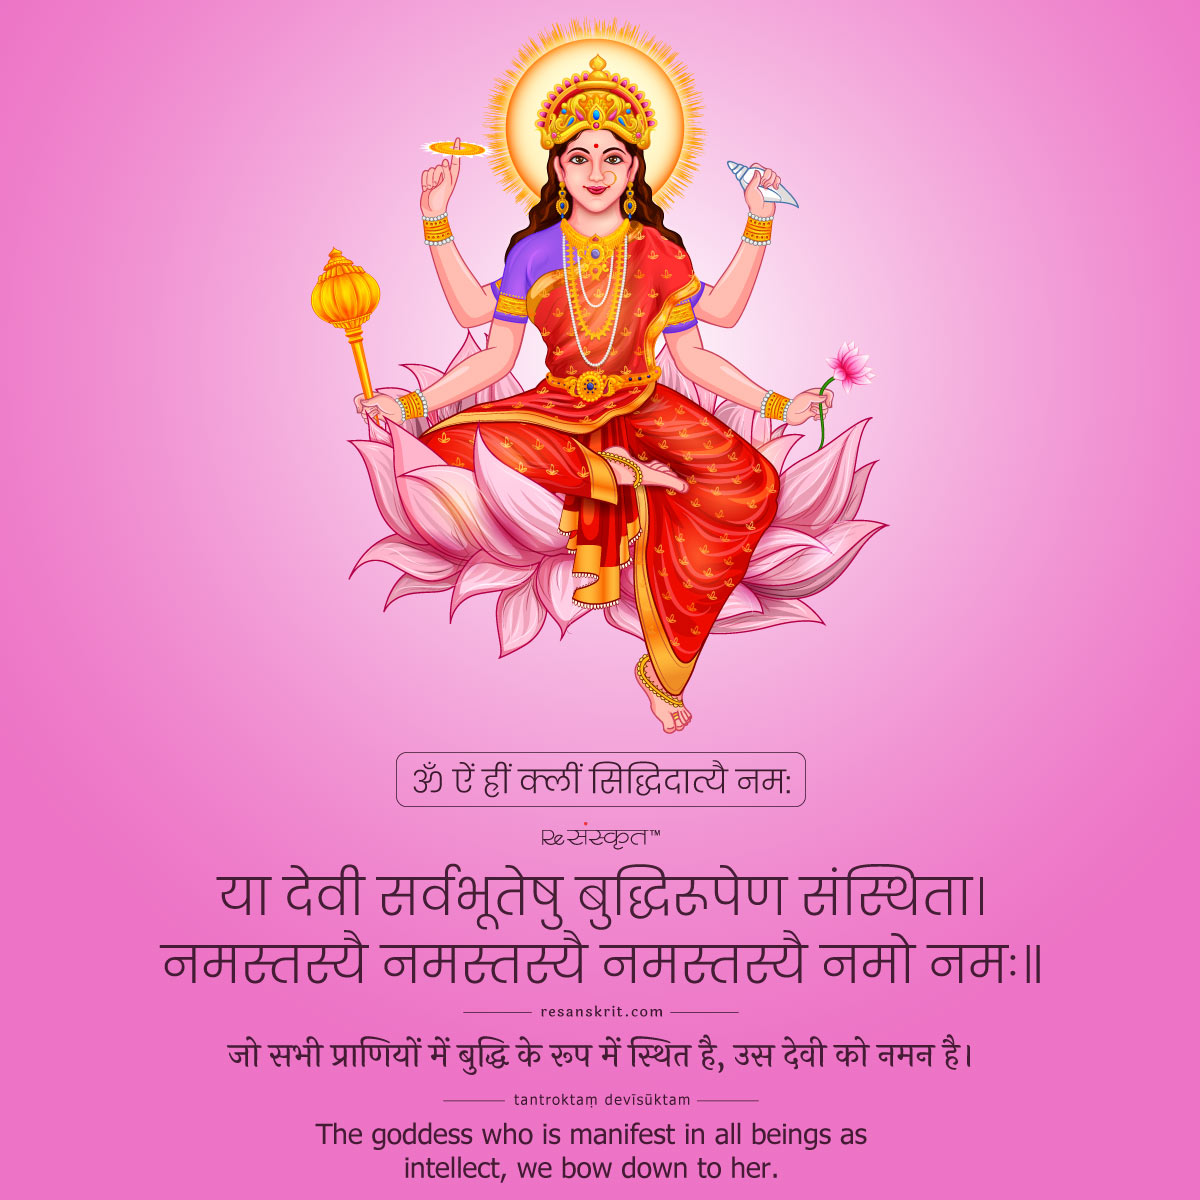 Day 9 of 9 - Siddhidhatri - Goddess of Supernatural Powers or Siddhis